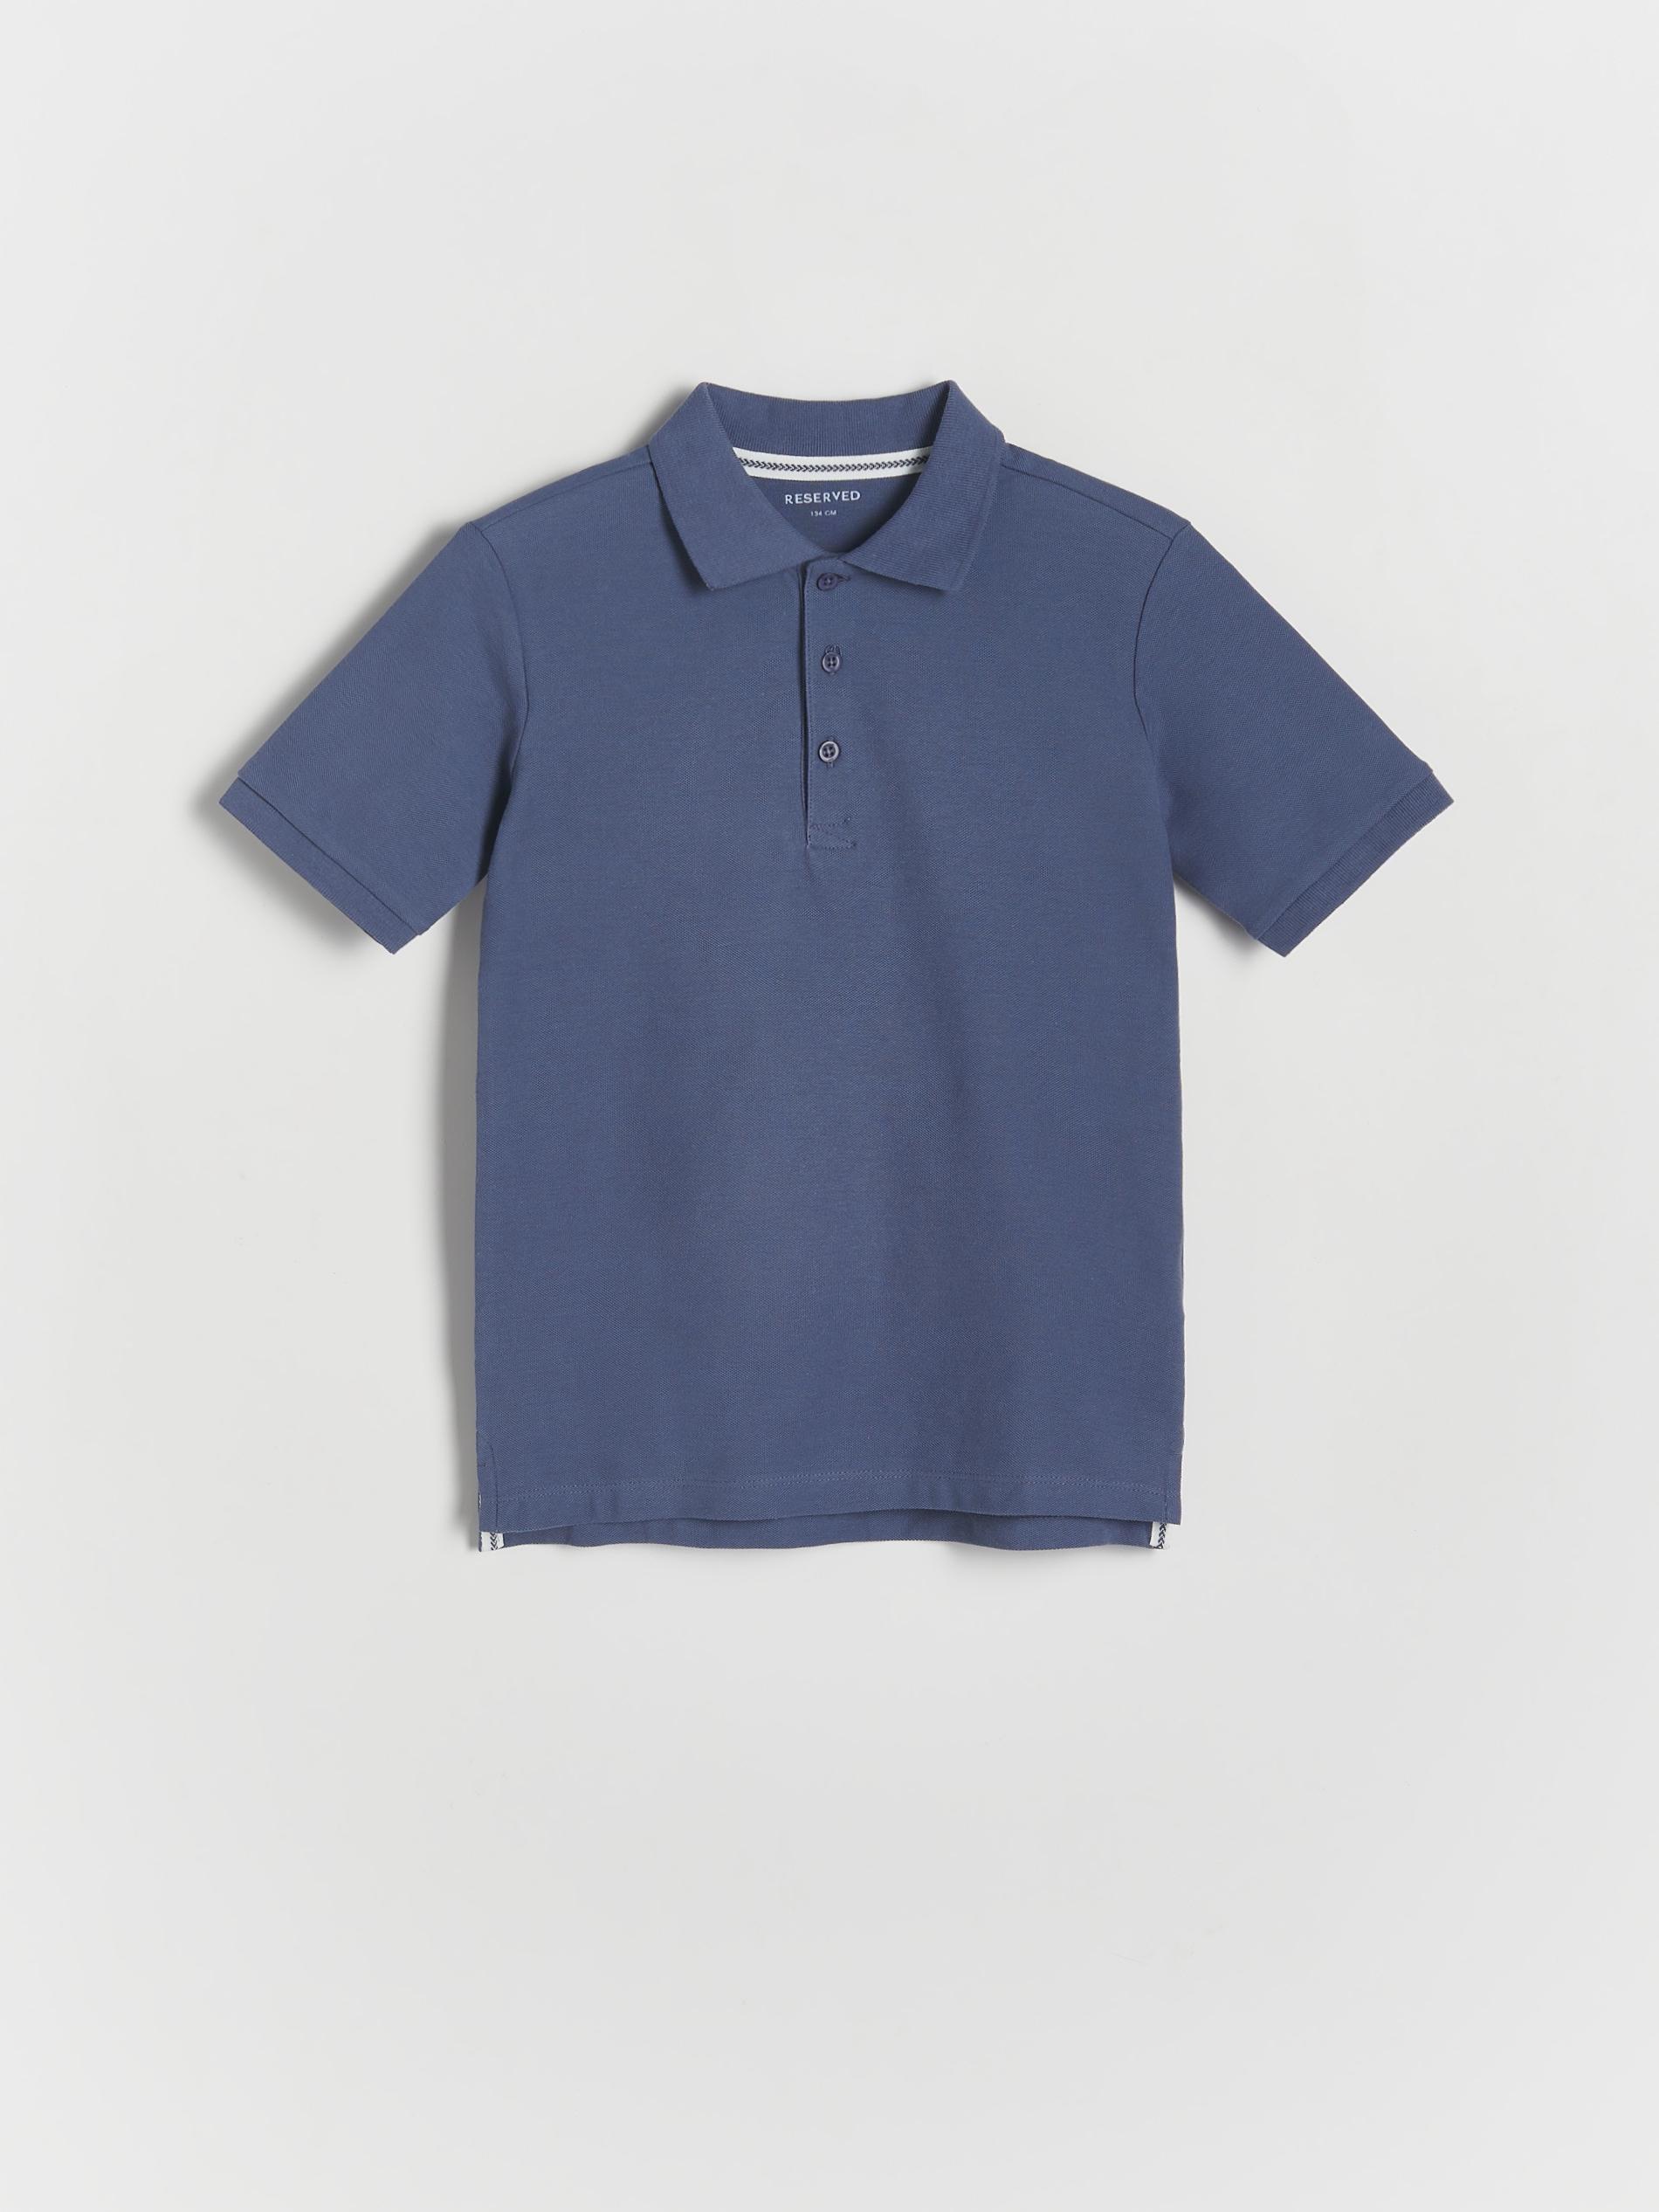 Reserved - Blue Polo T-Shirt, Kids Boys